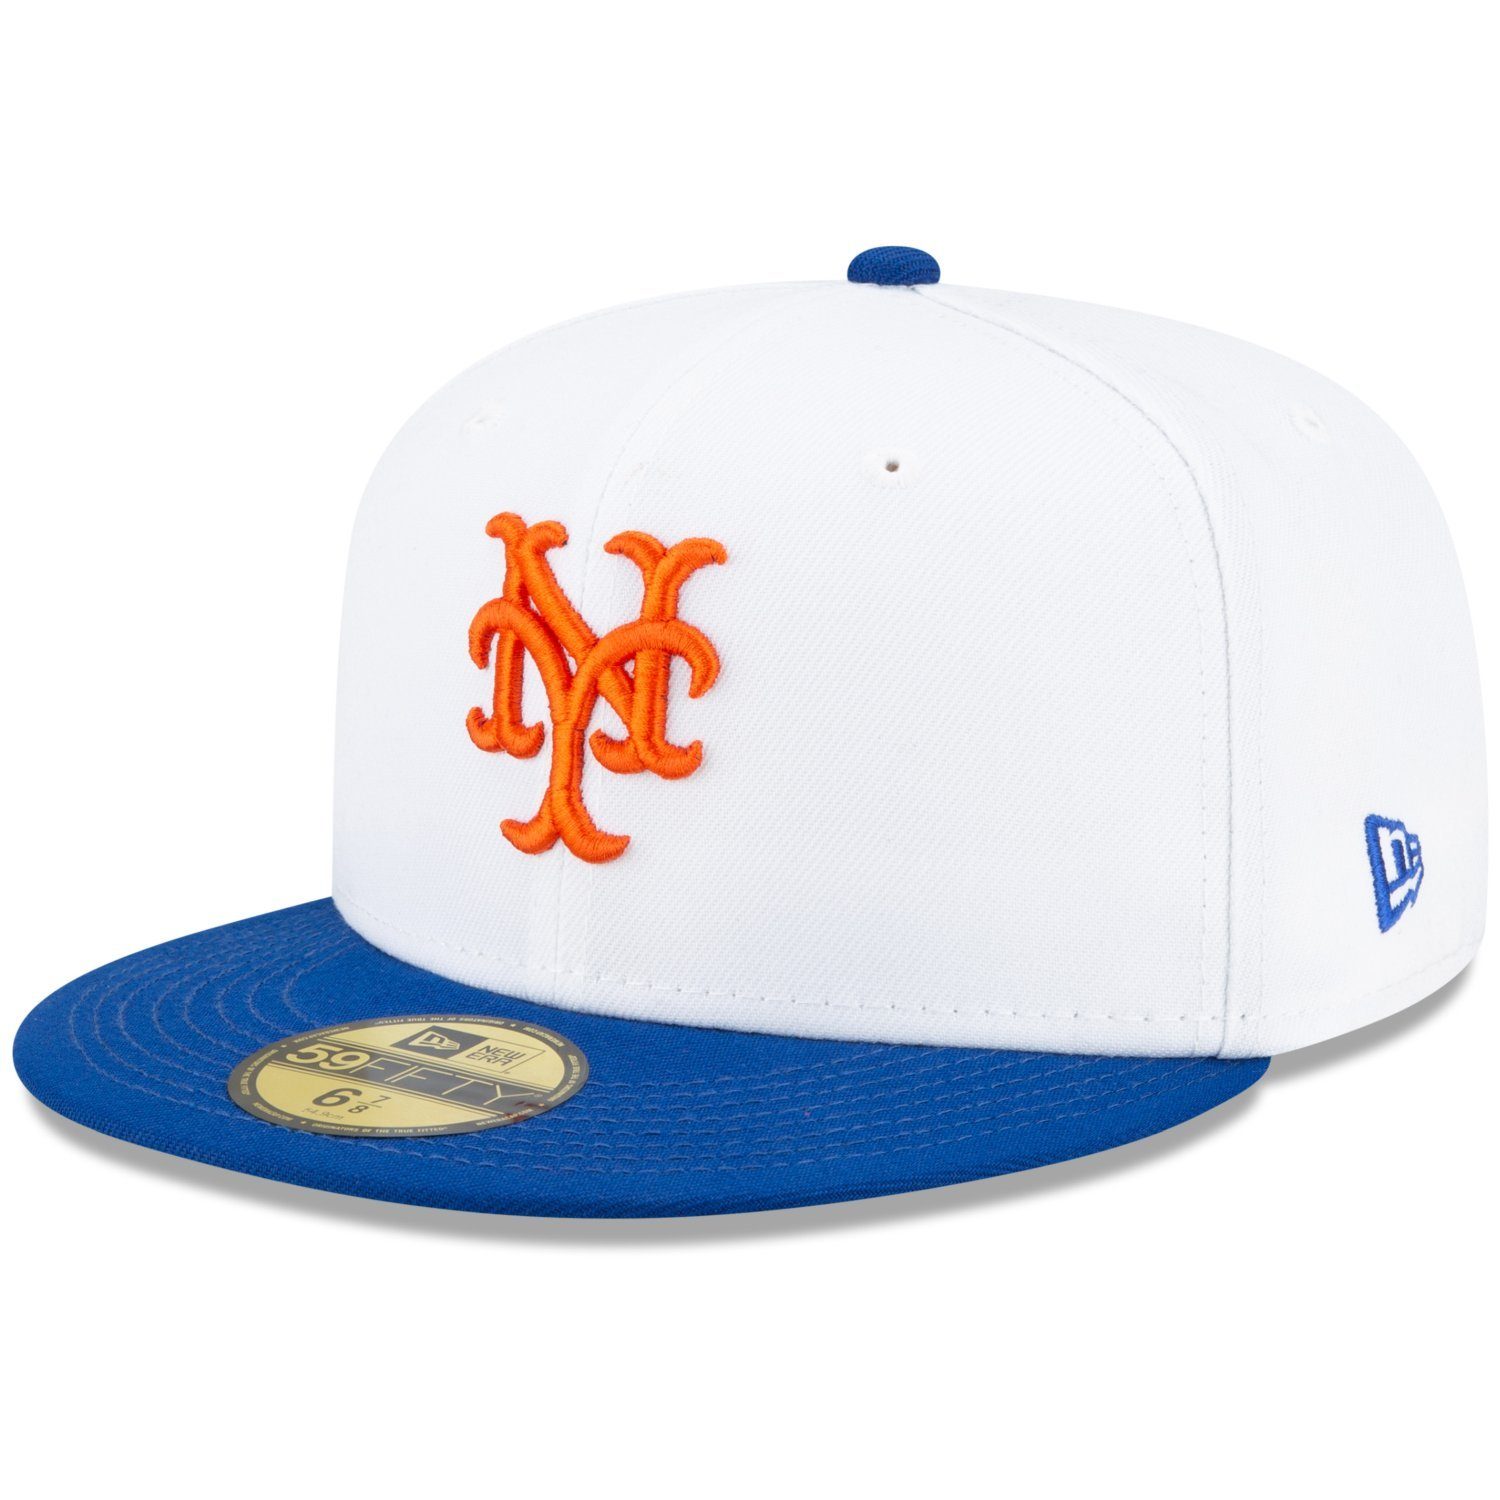 New Era Fitted Cap 59Fifty 1969 WORLD Mets York SERIES New